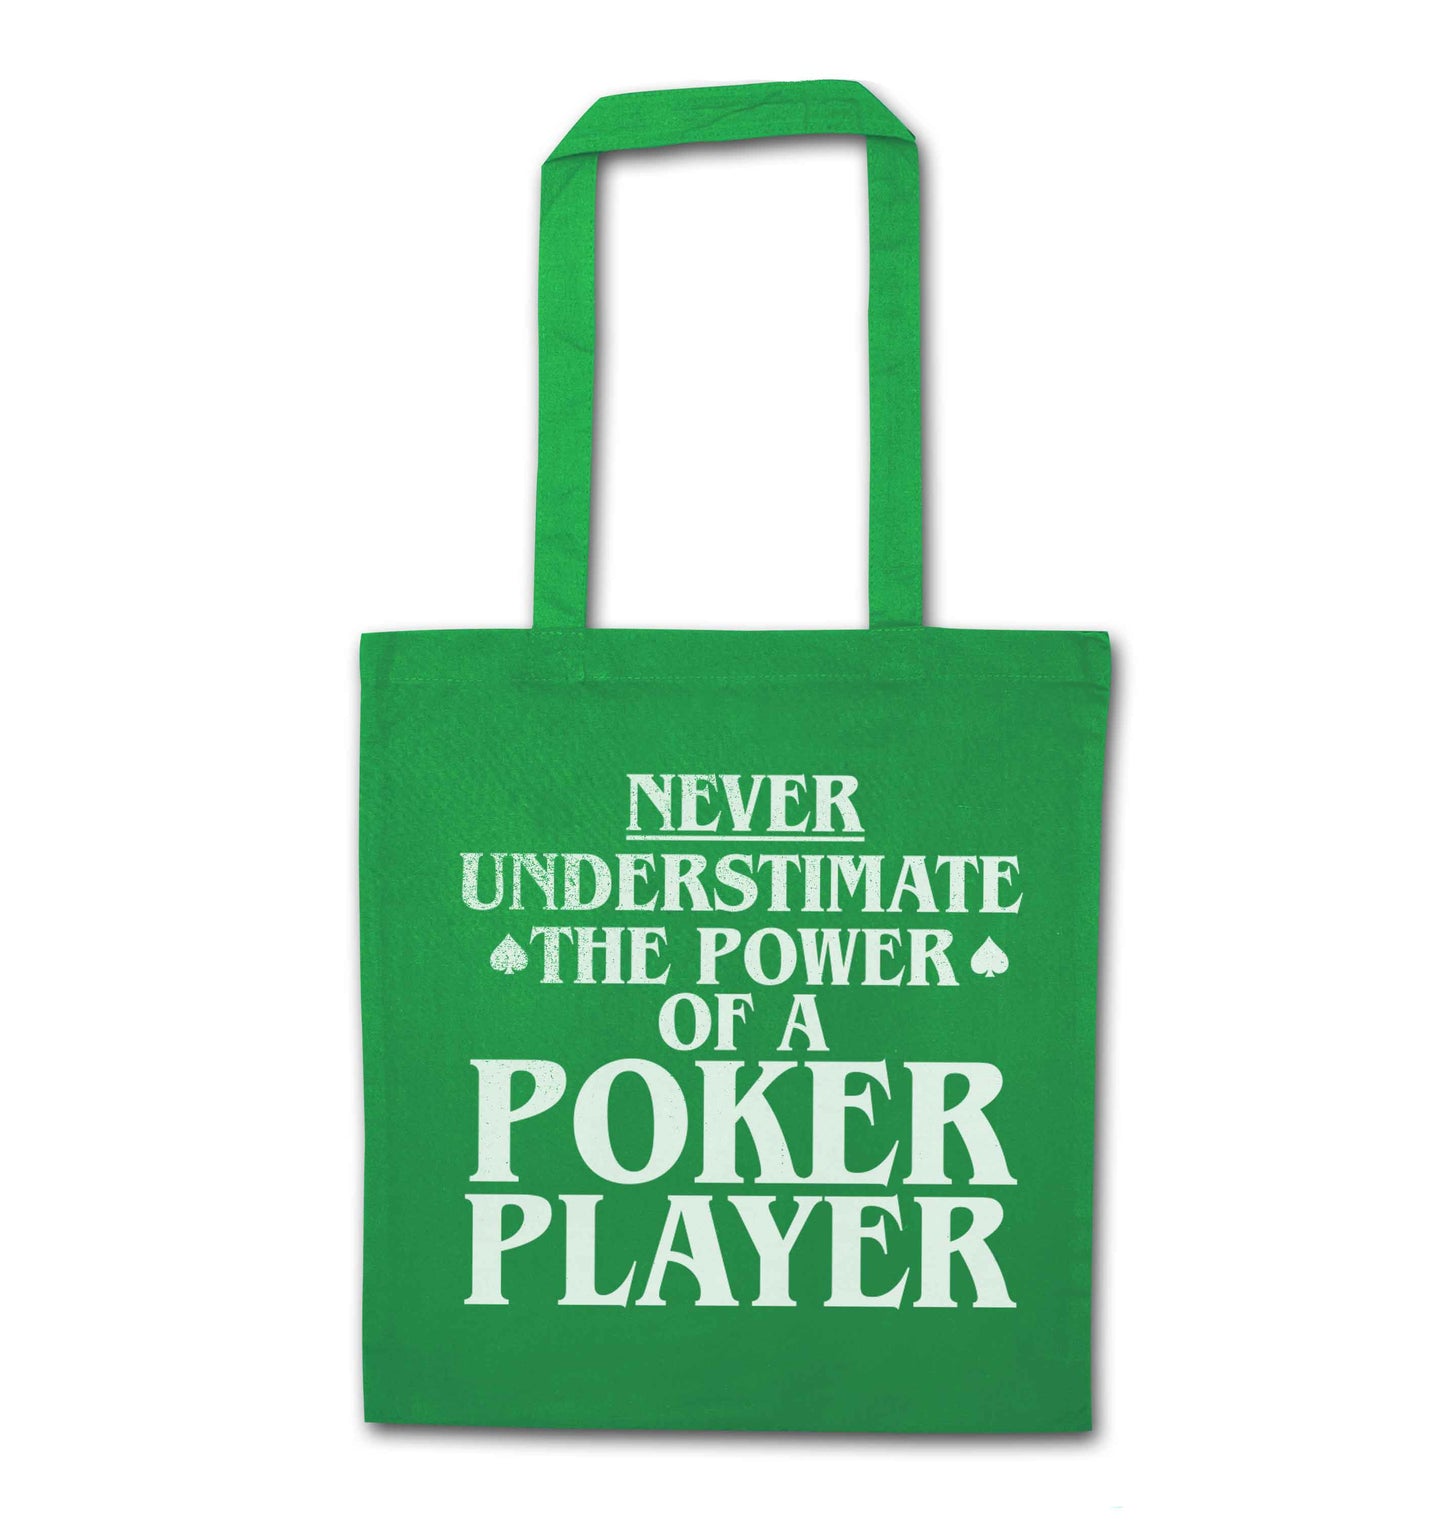 Never understimate the power of a poker player green tote bag